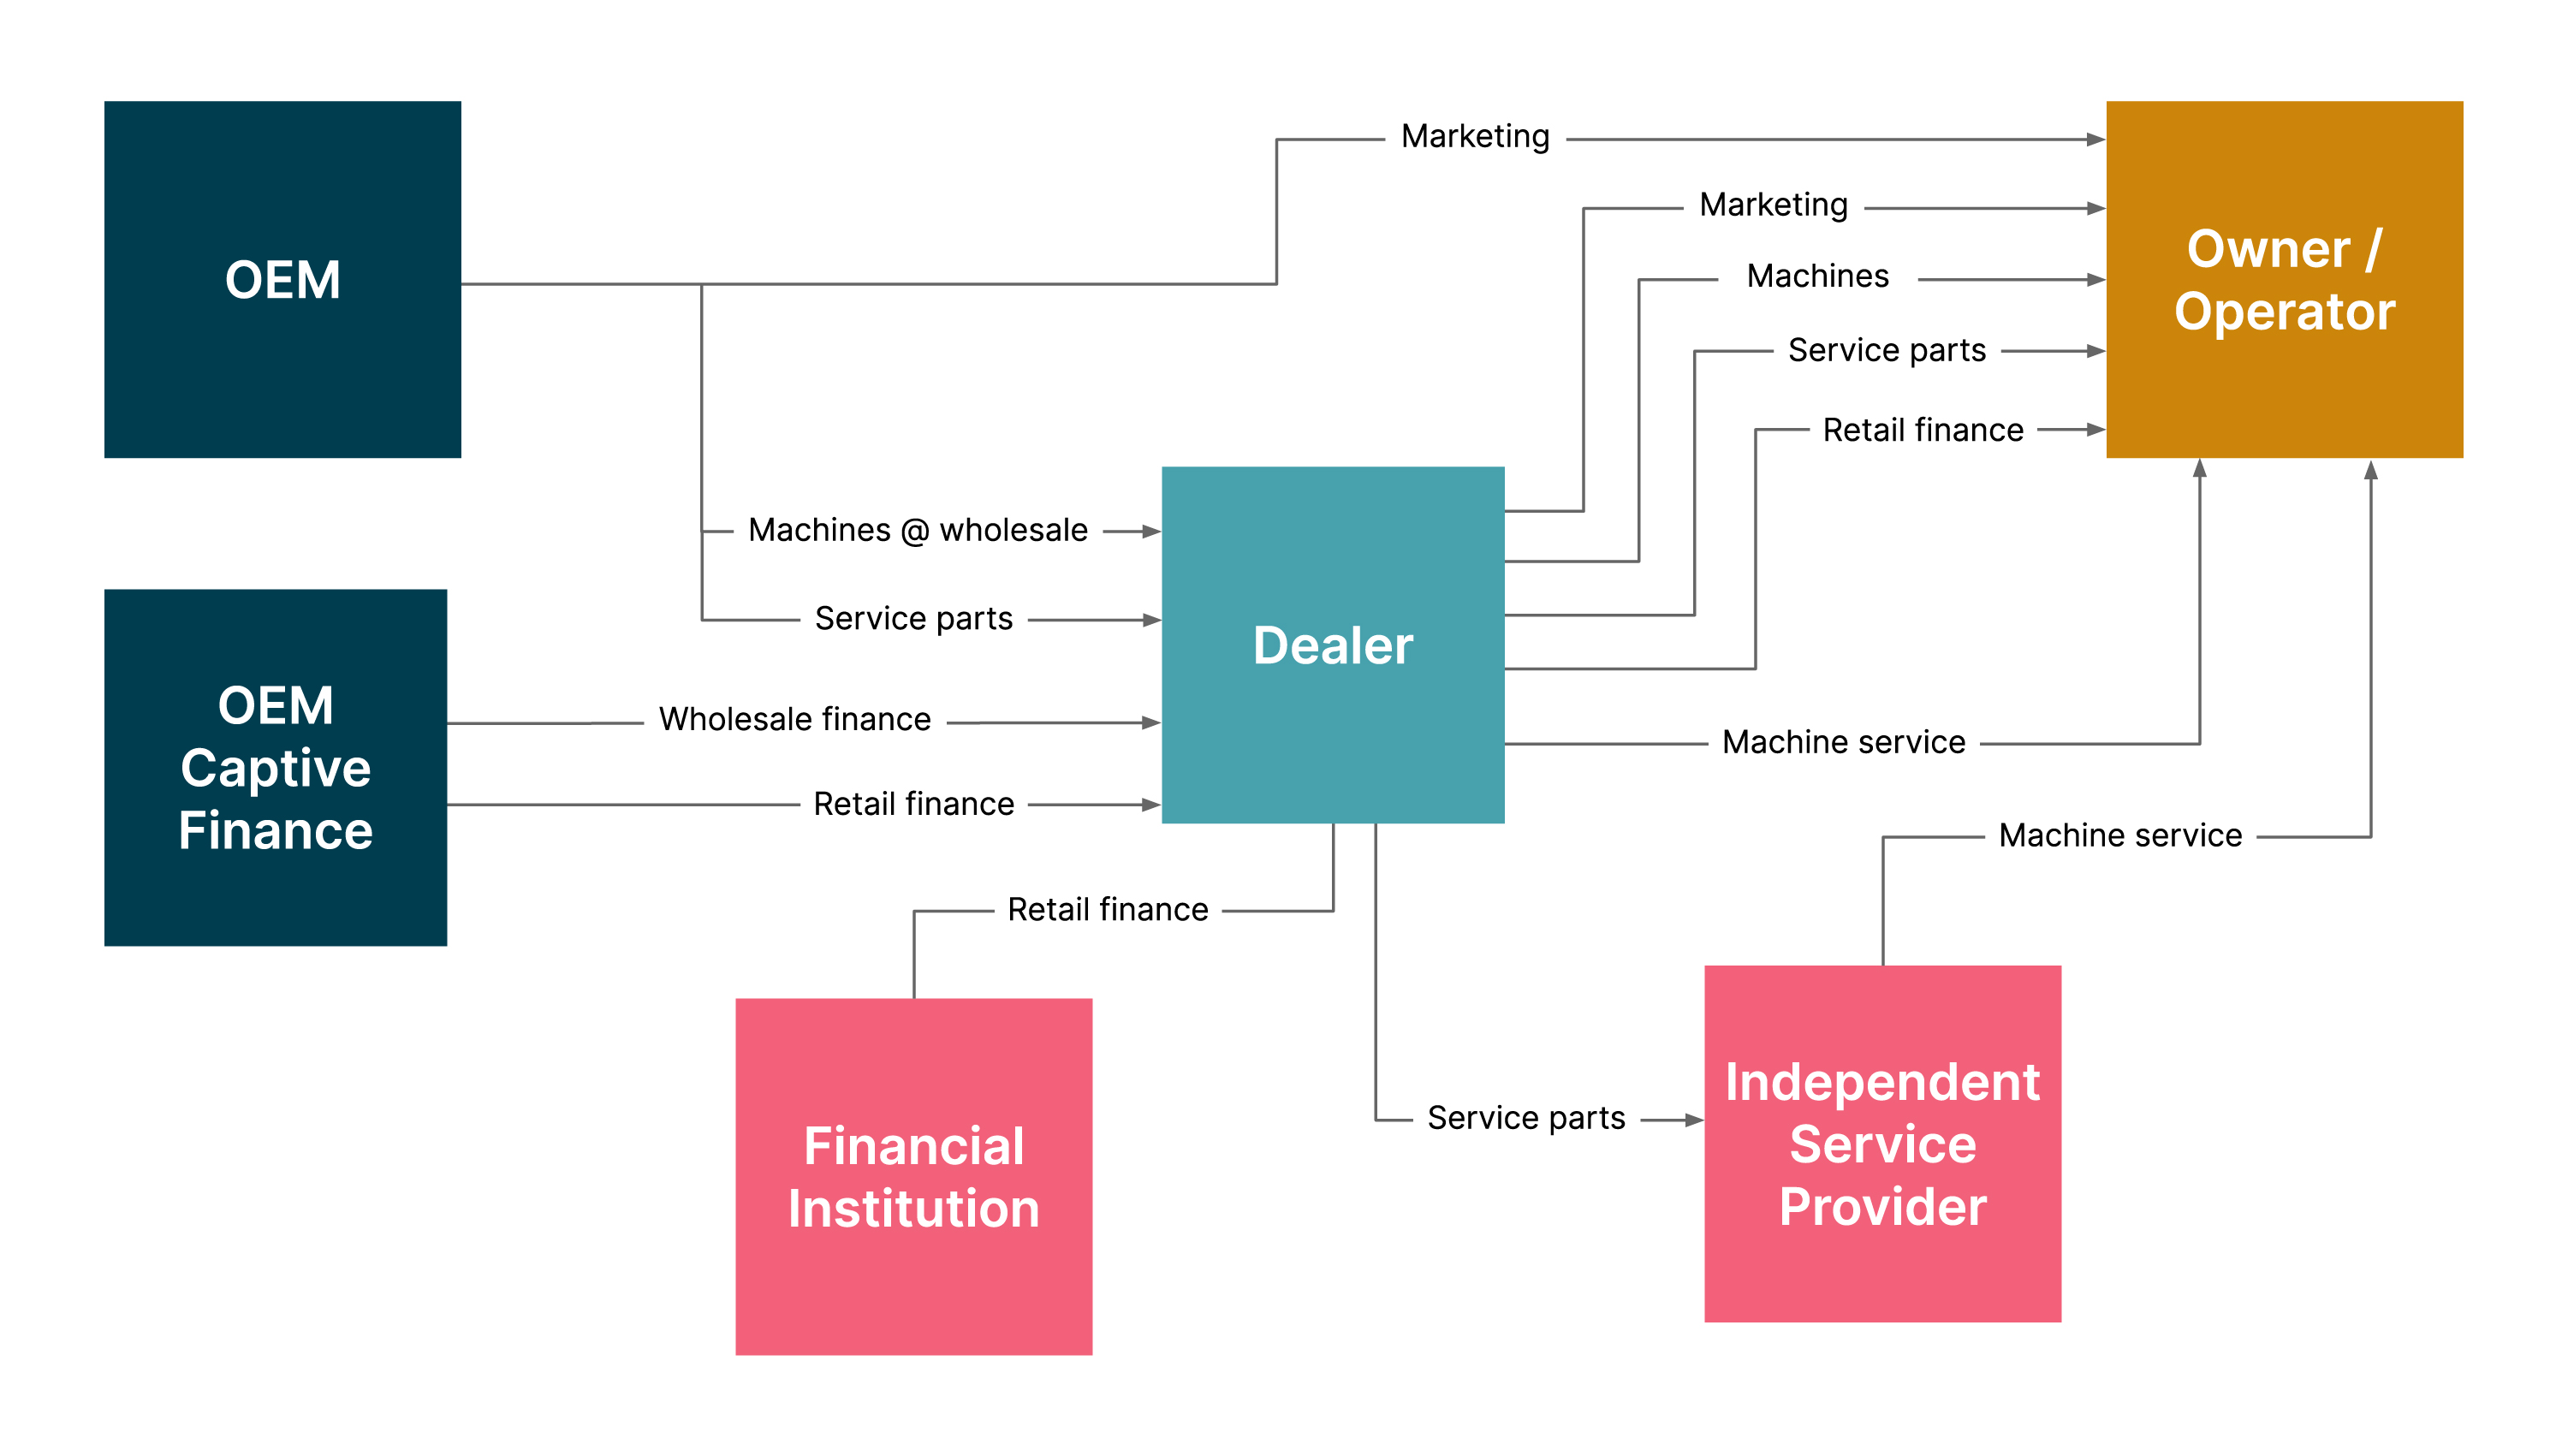 The traditional OEM sales and marketing landscape